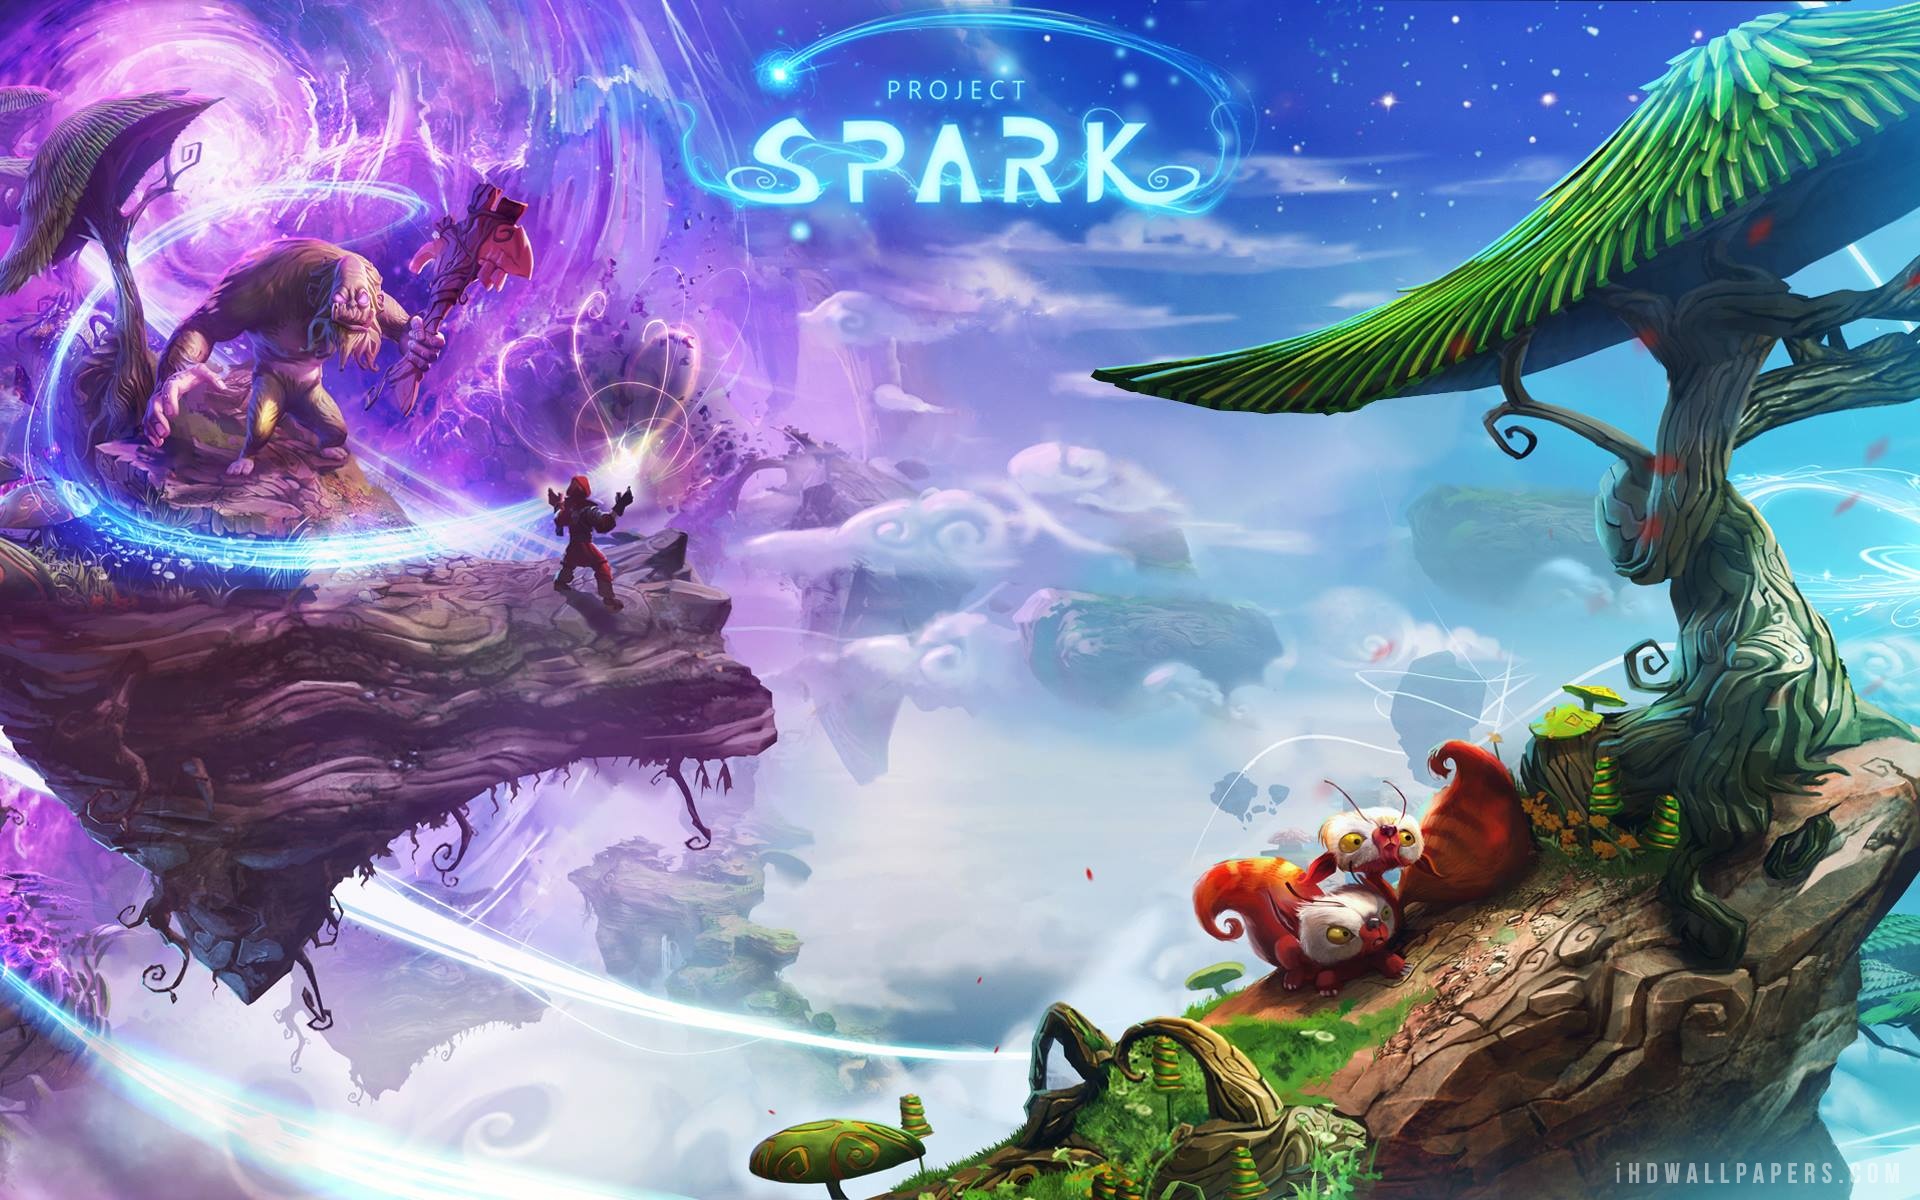 Project Spark 2014 HD Wallpaper   iHD Wallpapers